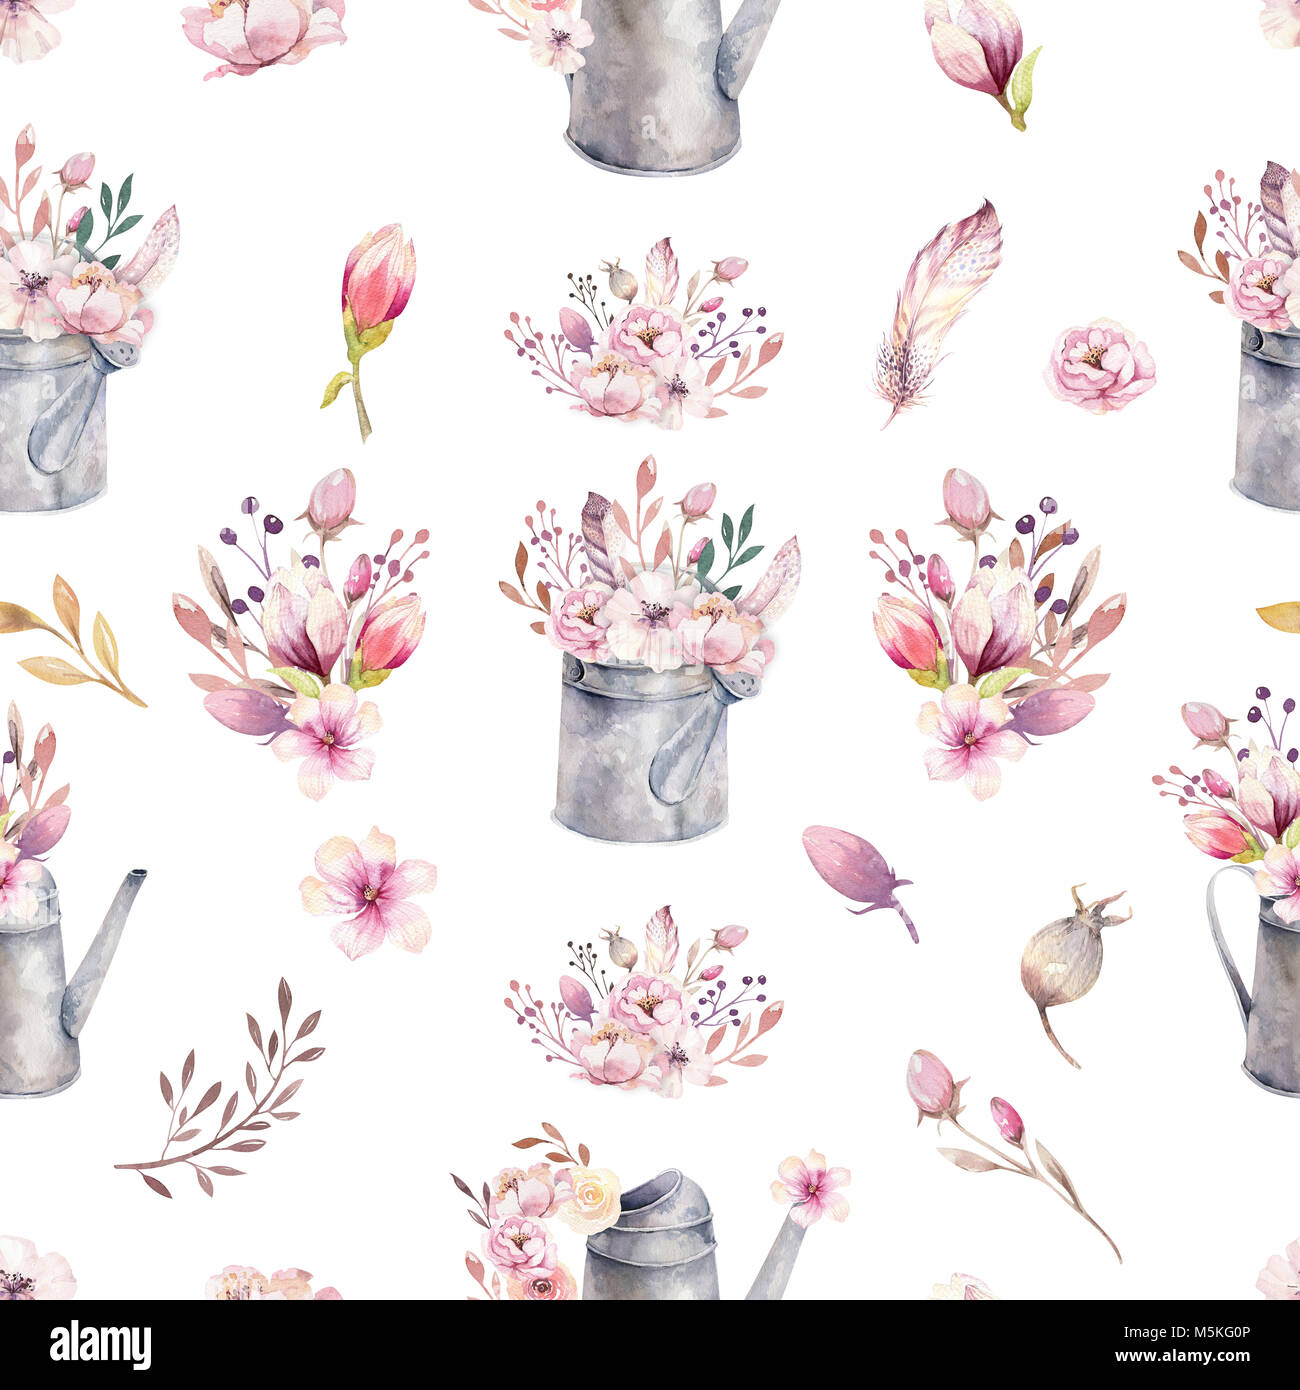 Watercolor vintage seamless pattern gardening tools rusty tin watering can for watering flowers. Hand drawn boho illustration with flower bouquets Stock Photo